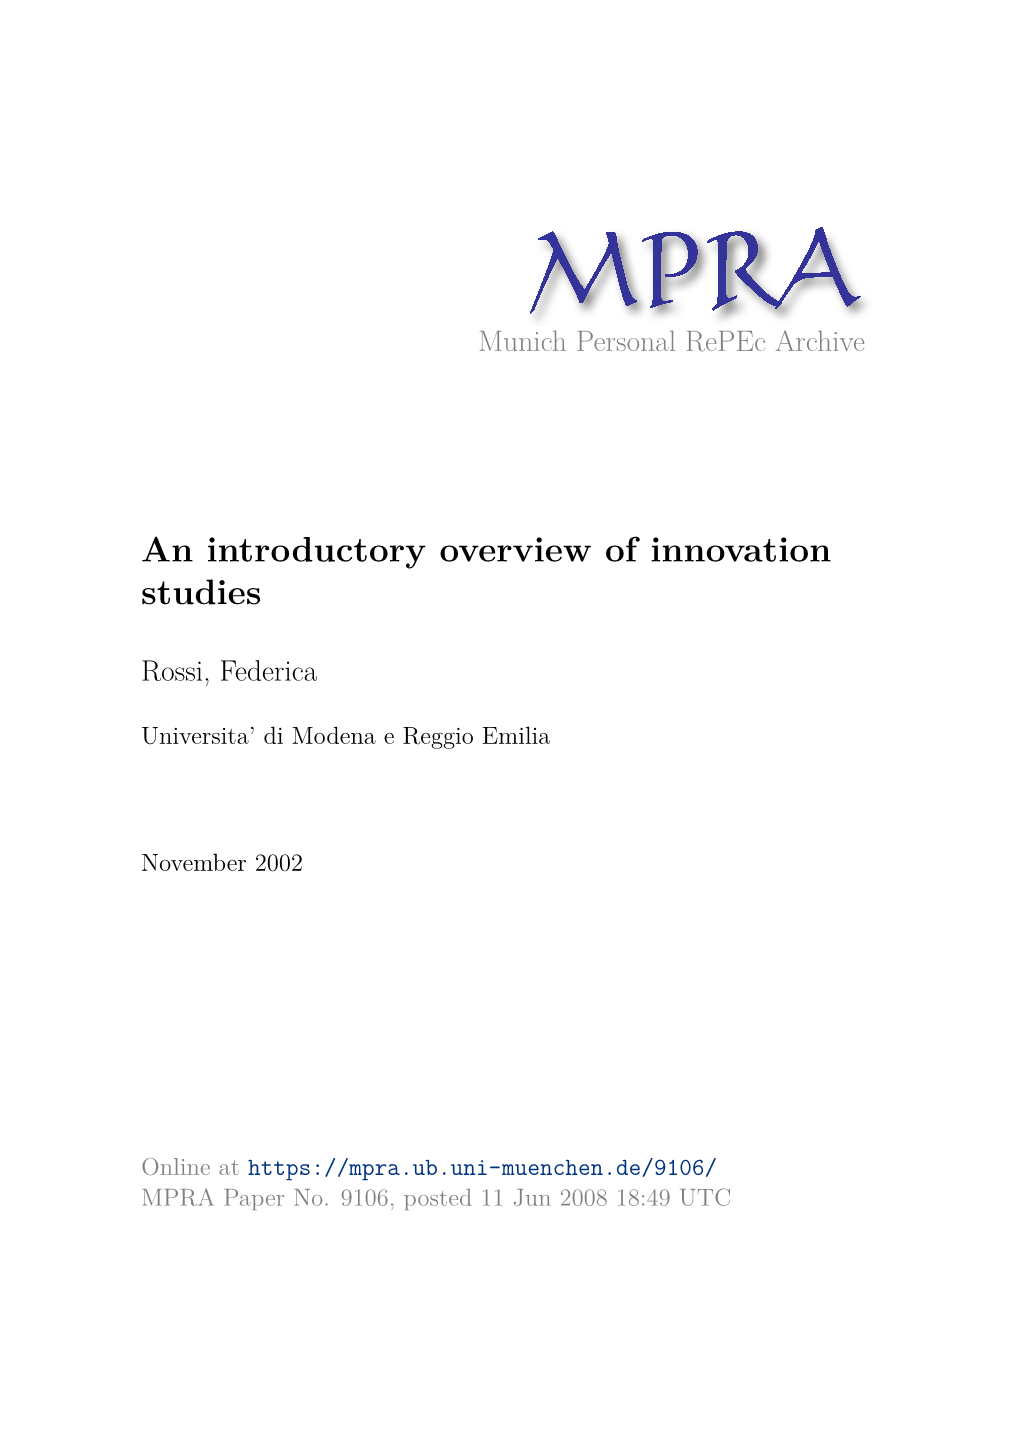 An Introductory Overview of Innovation Studies